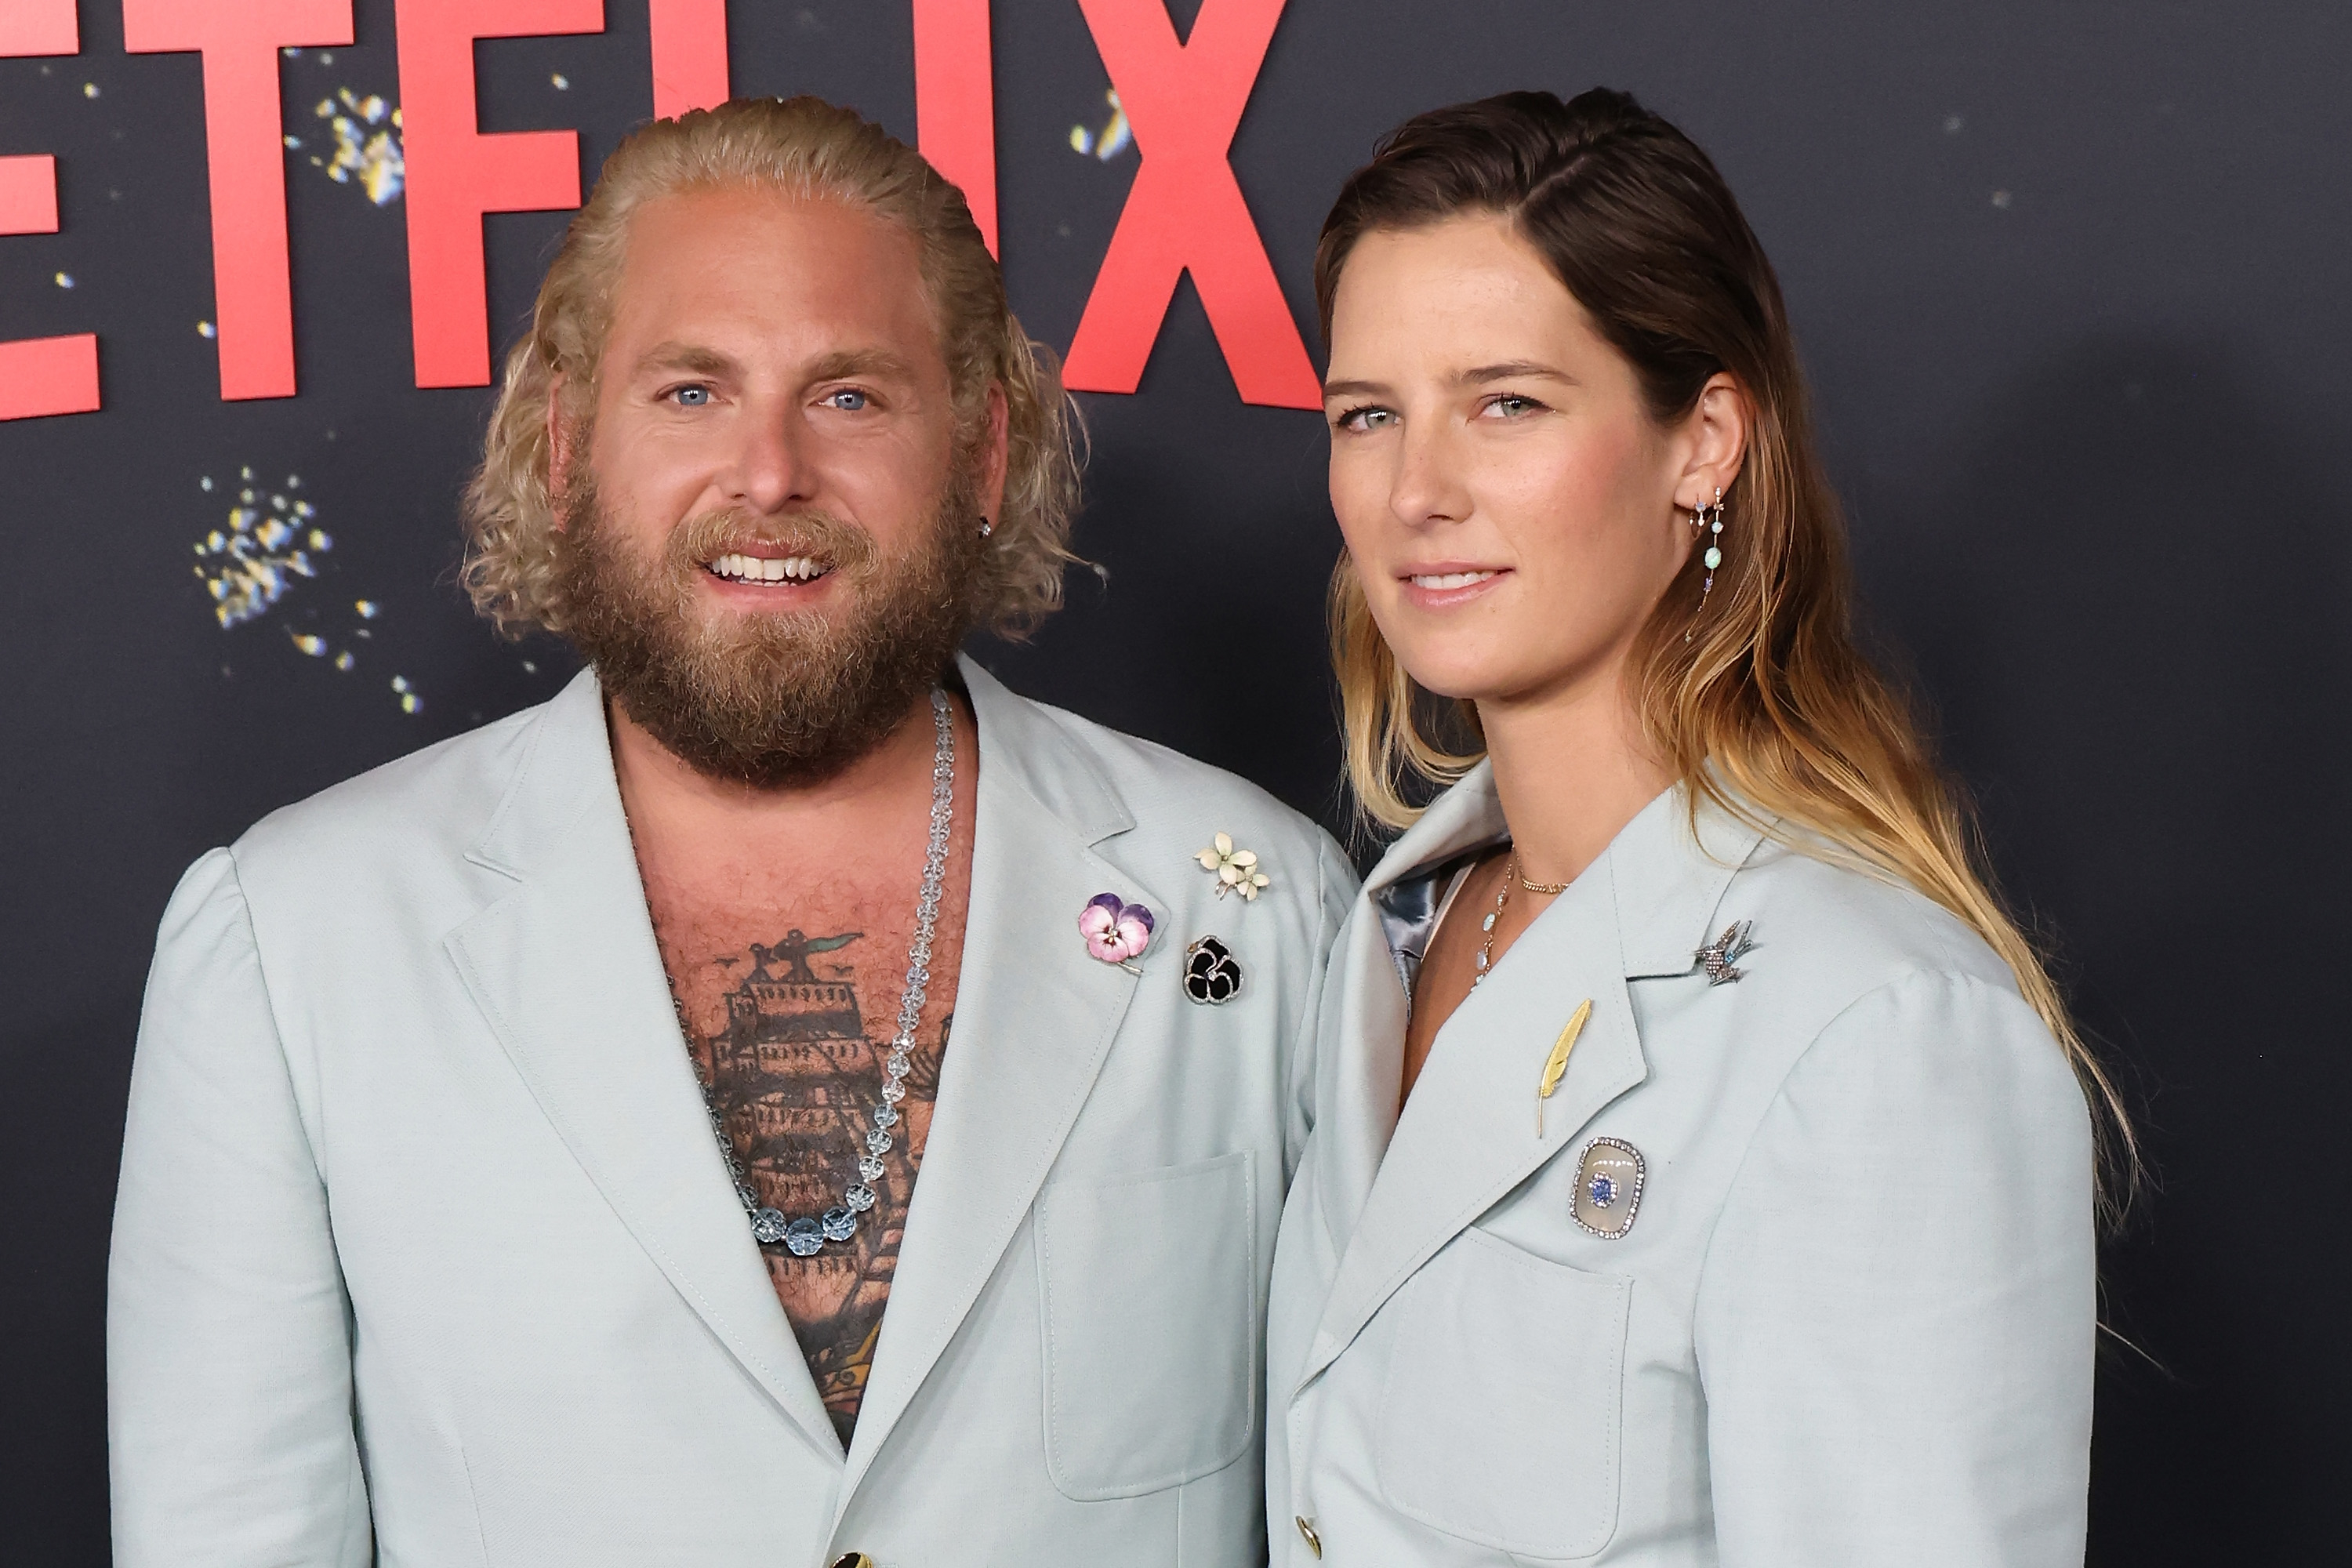 Jonah and Sarah in matching suits at a media event